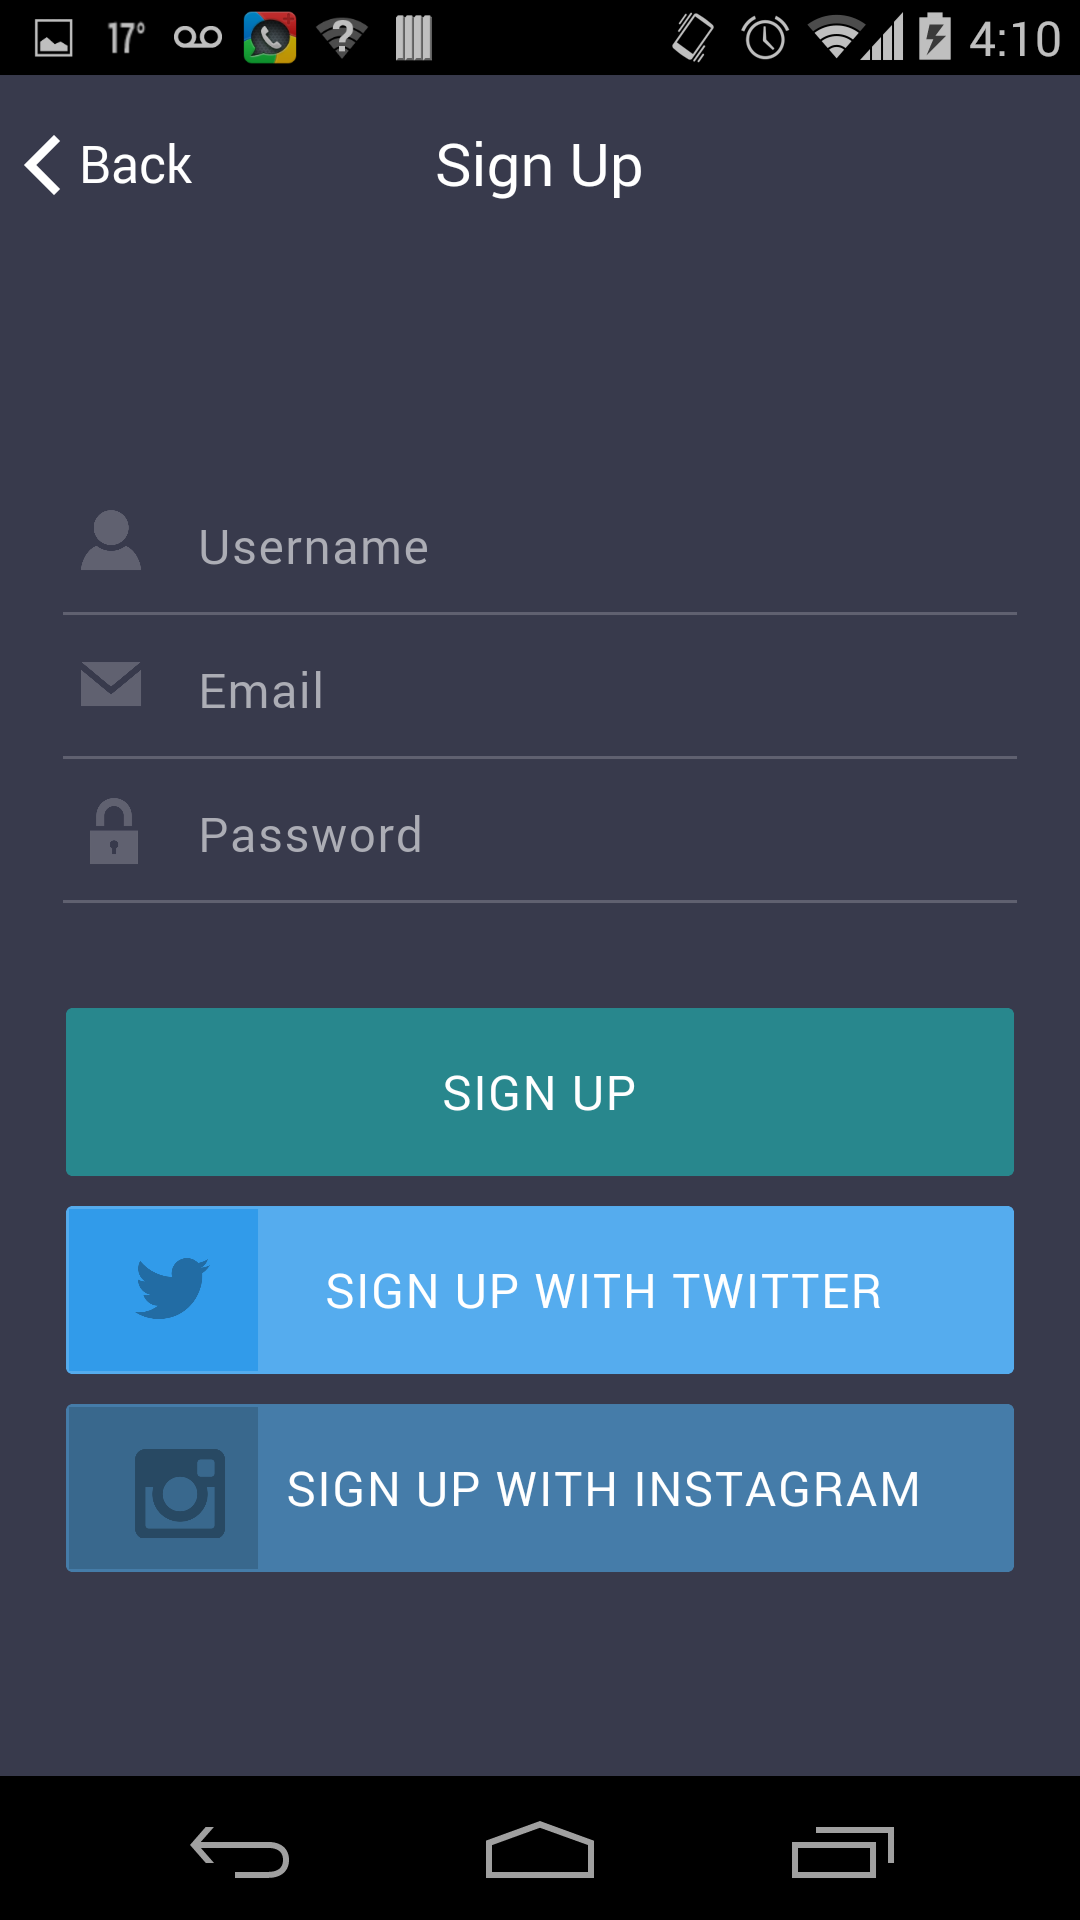 SignUp Page